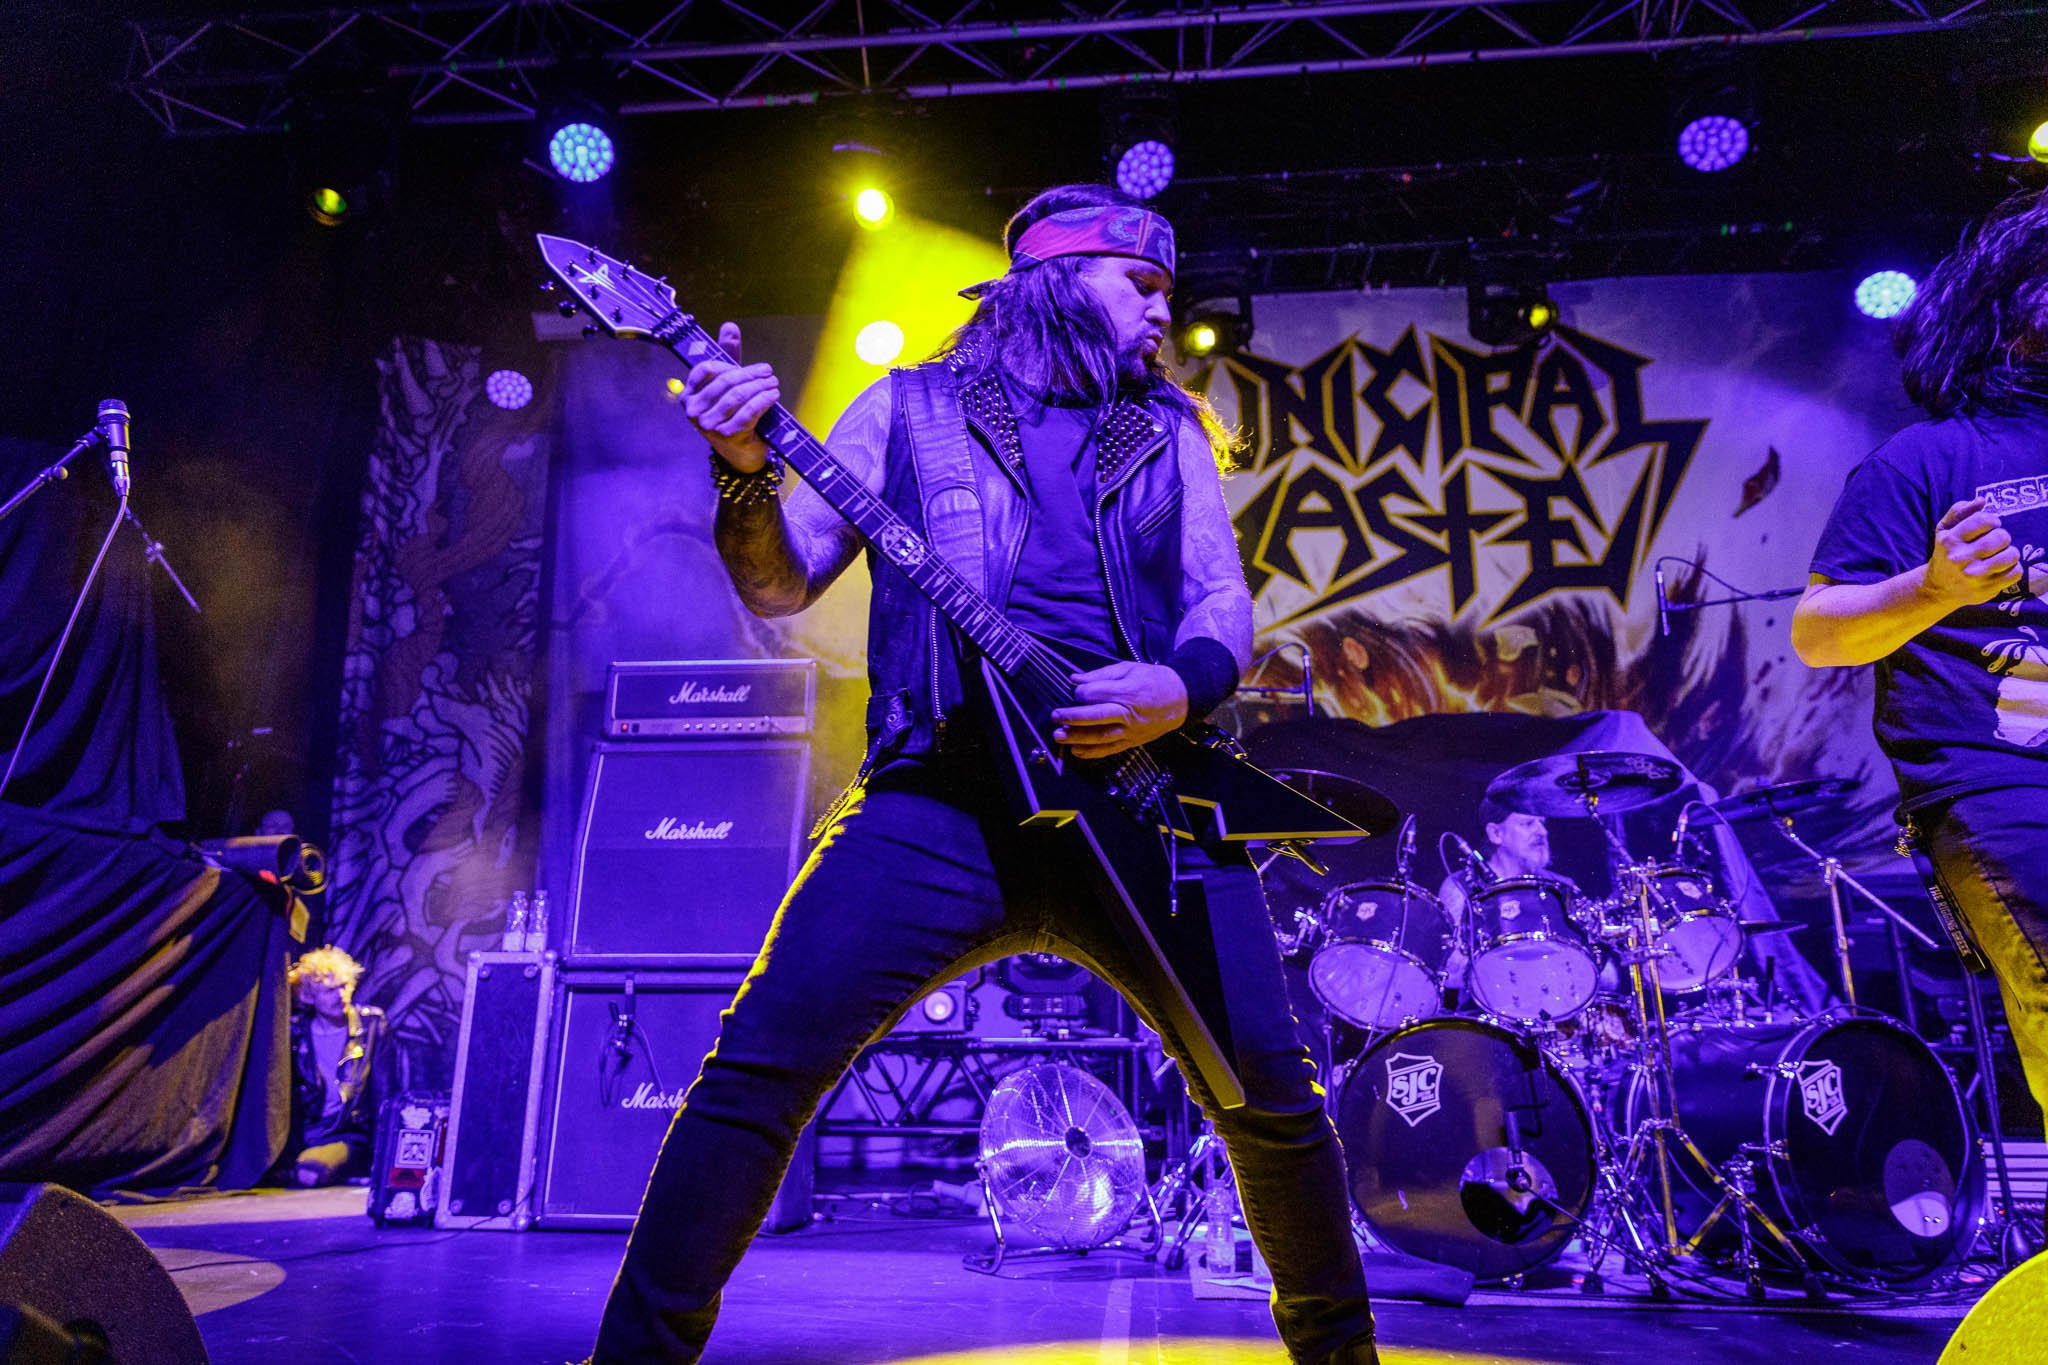 Municipal Waste at the Academy in Manchester on March 7th 2023 